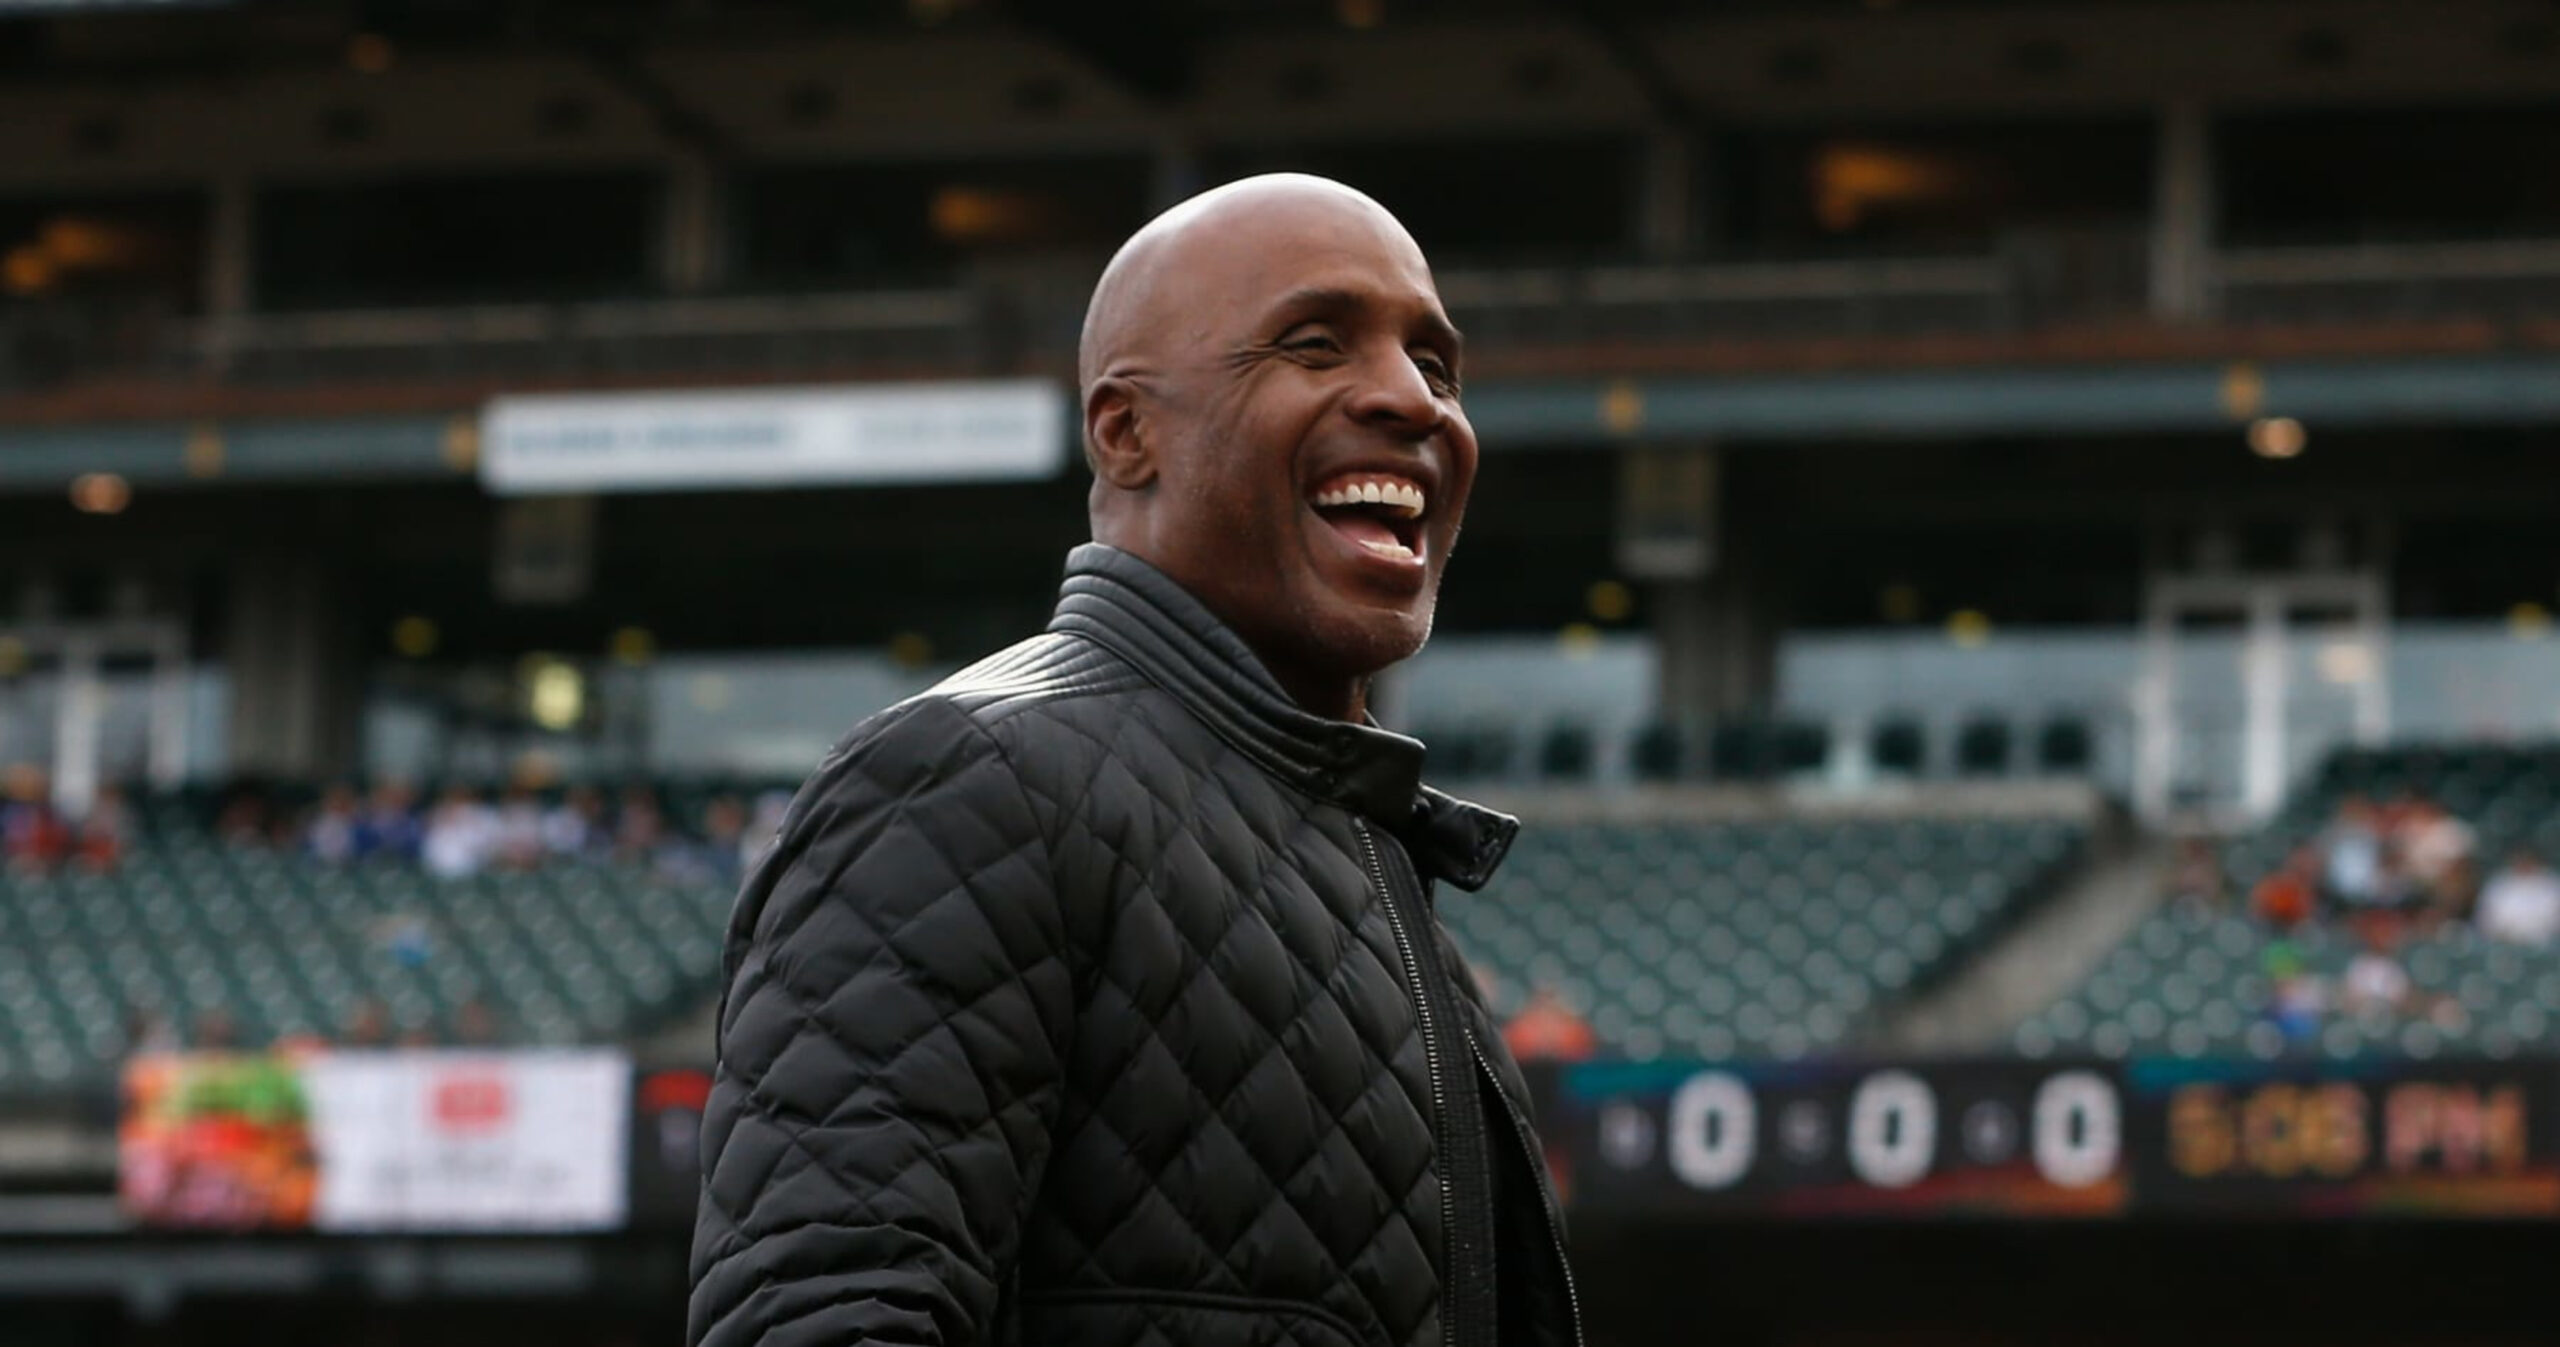 Barry Bonds to Be Inducted into Pirates Hall of Fame; MLB Memoir Learns Info in Video